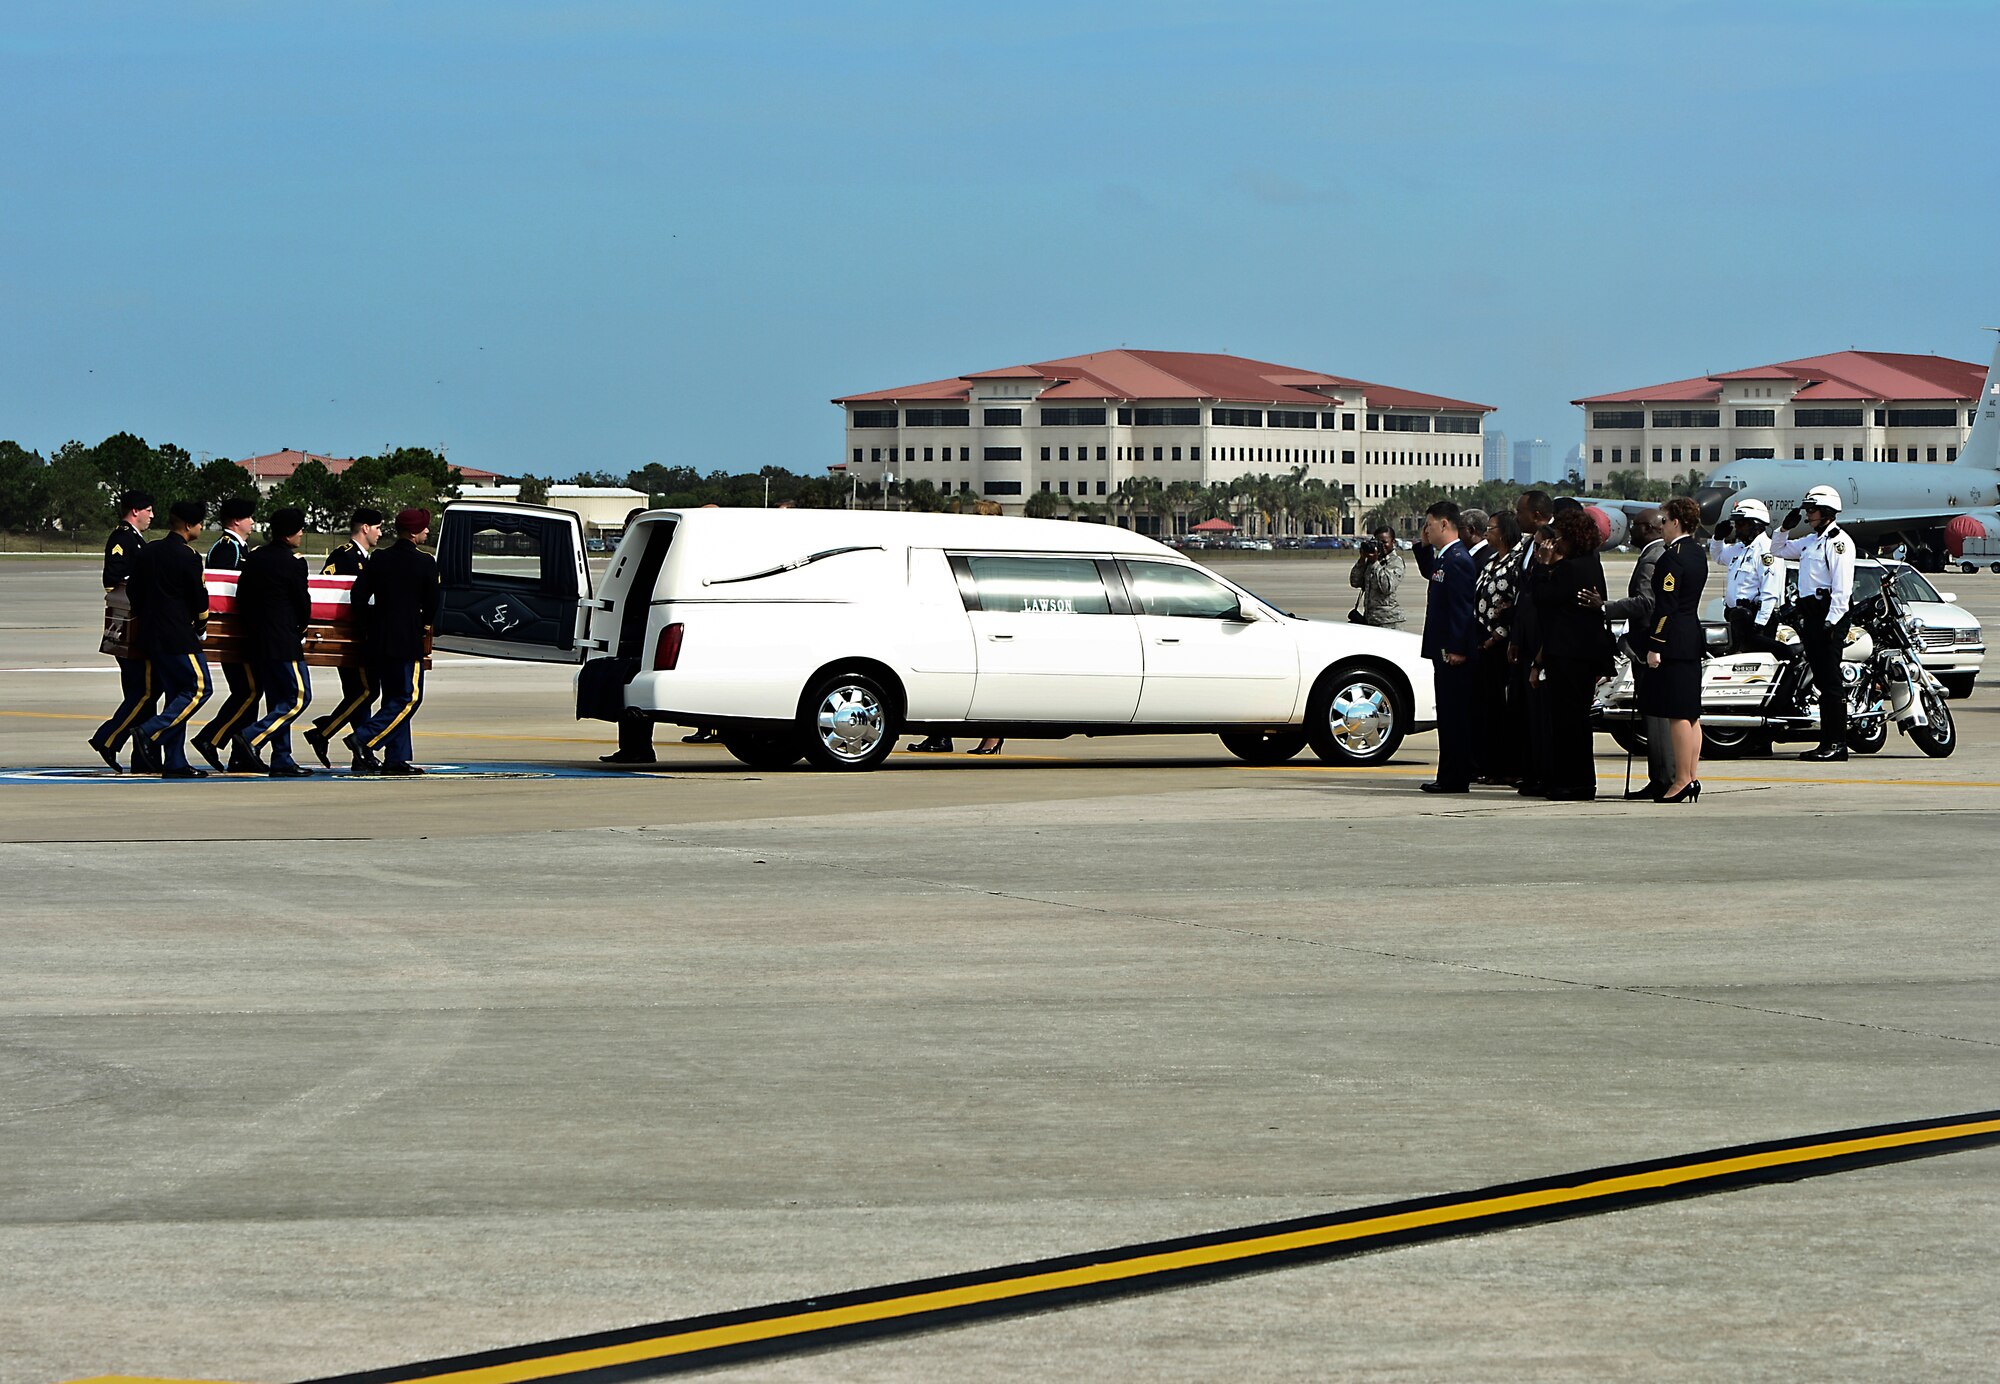 The remains of Spc. Brittany B. Gordon are carried by Army honor guardsmen to a hearse at MacDill Air Force Base Fla., Oct. 24, 2012. Gordon died from wounds suffered by an attack with an improvised explosive device on Oct. 13 in Kandahar, Afghanistan, she was assigned to Joint Base Lewis-McChord, Wash. (U.S. Air Force photo by Airman 1st Class Melanie Bulow-Kelly/Released)  
 
